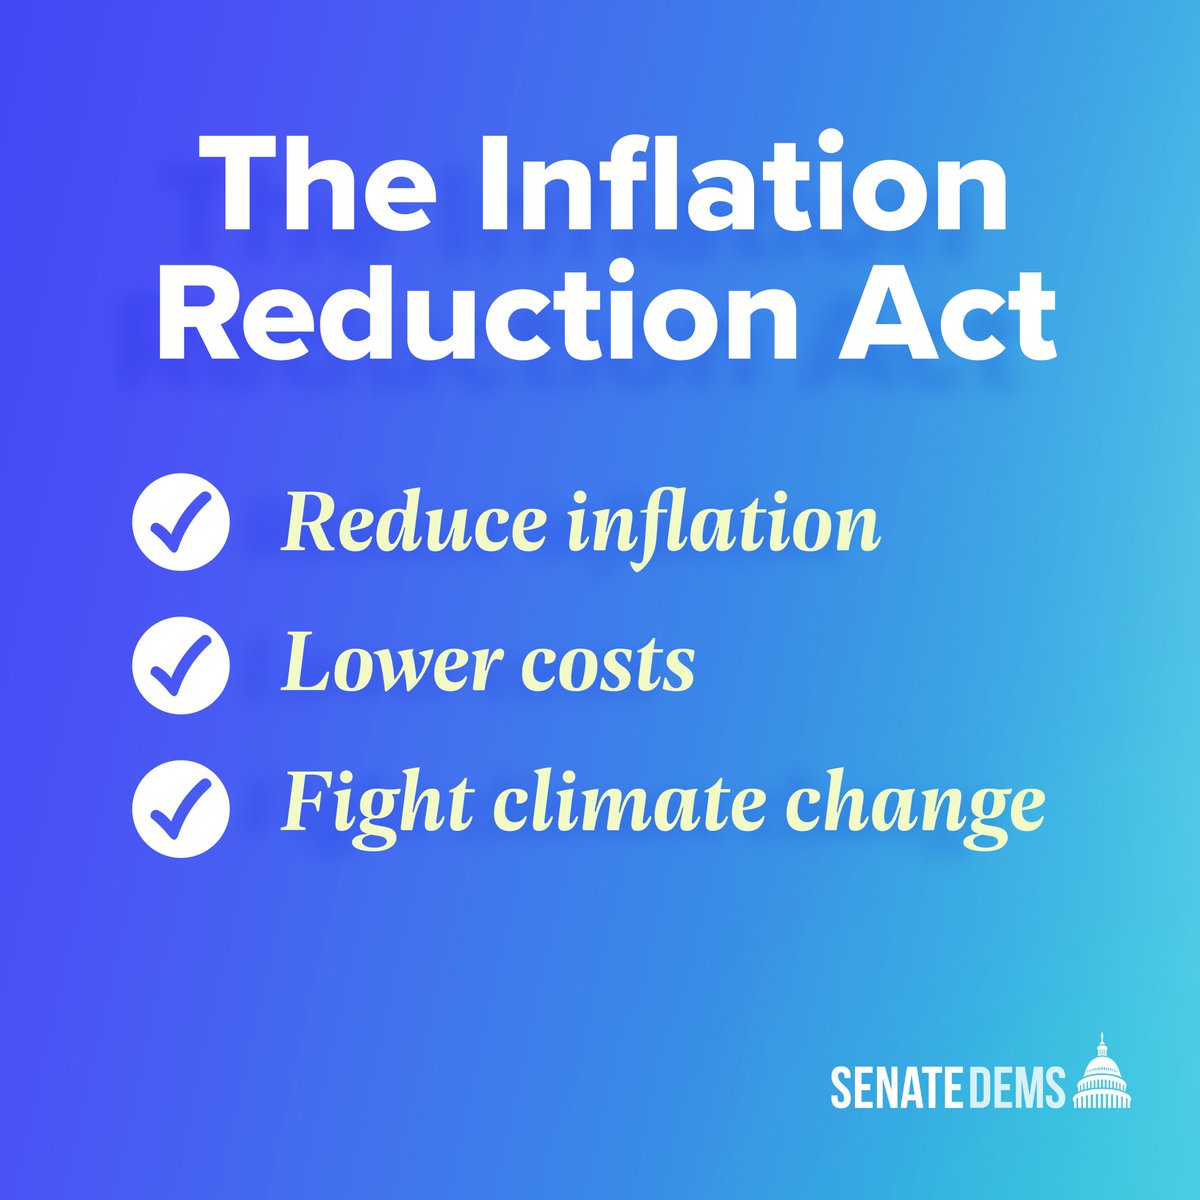 BREAKING NEWS: The Senate Democratic Majority has just passed the Inflation Reduction Act. It is a groundbreaking bill for the American people.